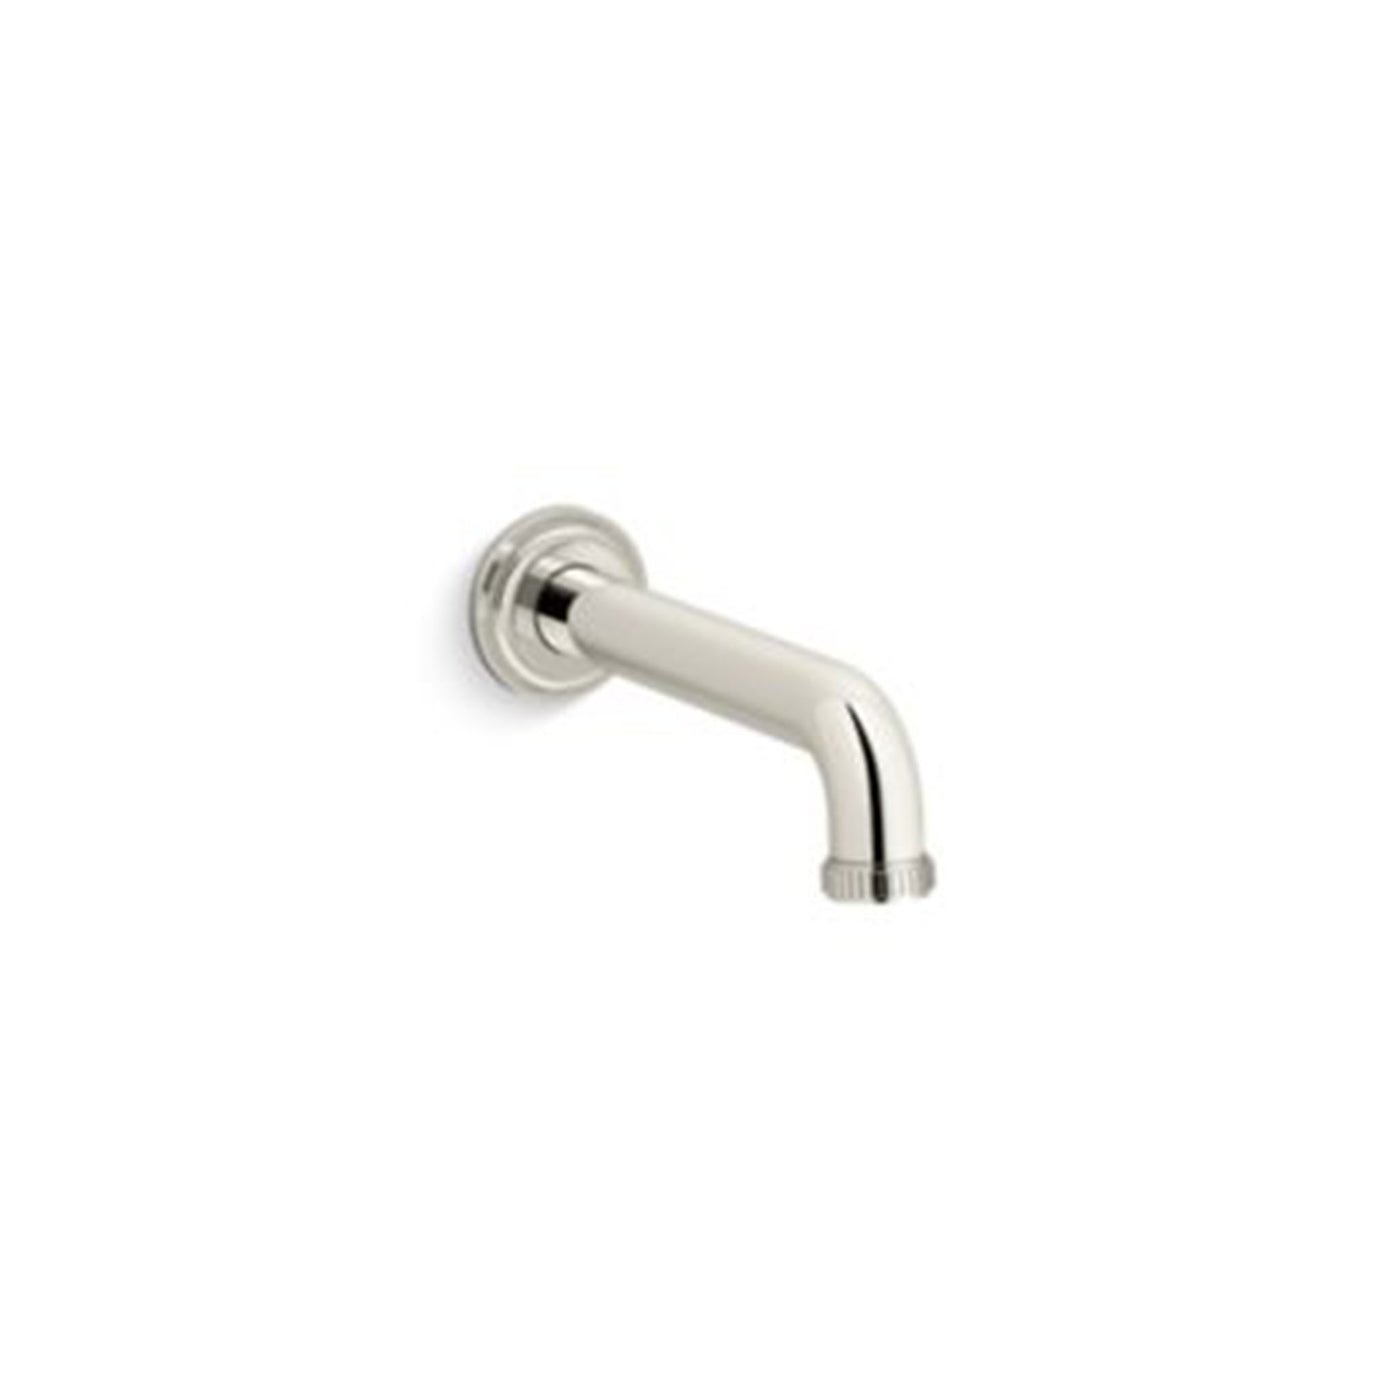 Central Park West™ by Robert A.M. Stern Architects Wall-Mount Bath Spout